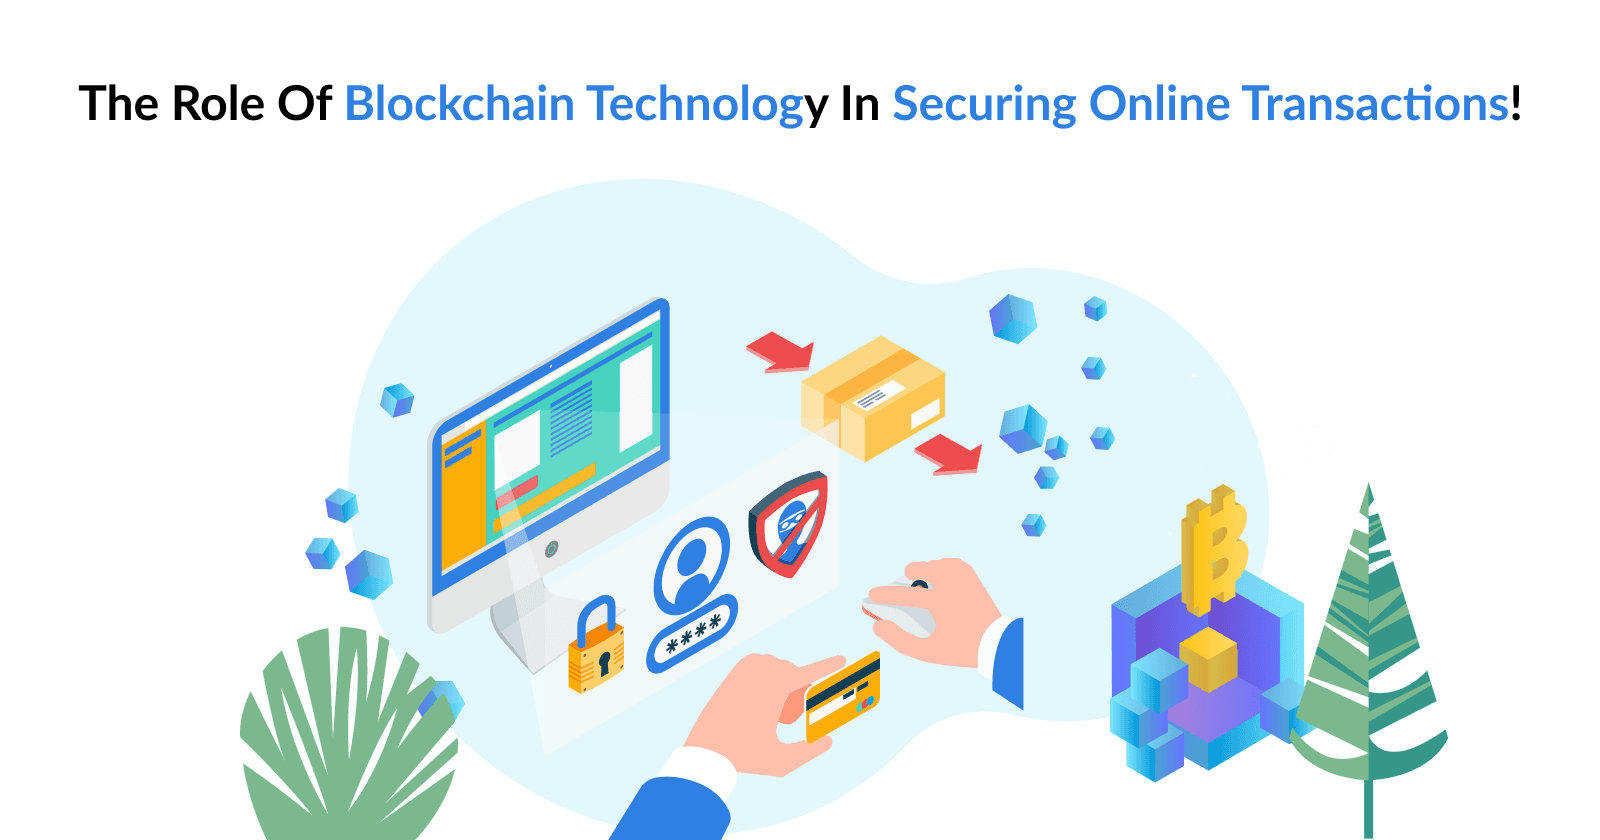 The Role of Blockchain Technology in Securing Online Transactions!